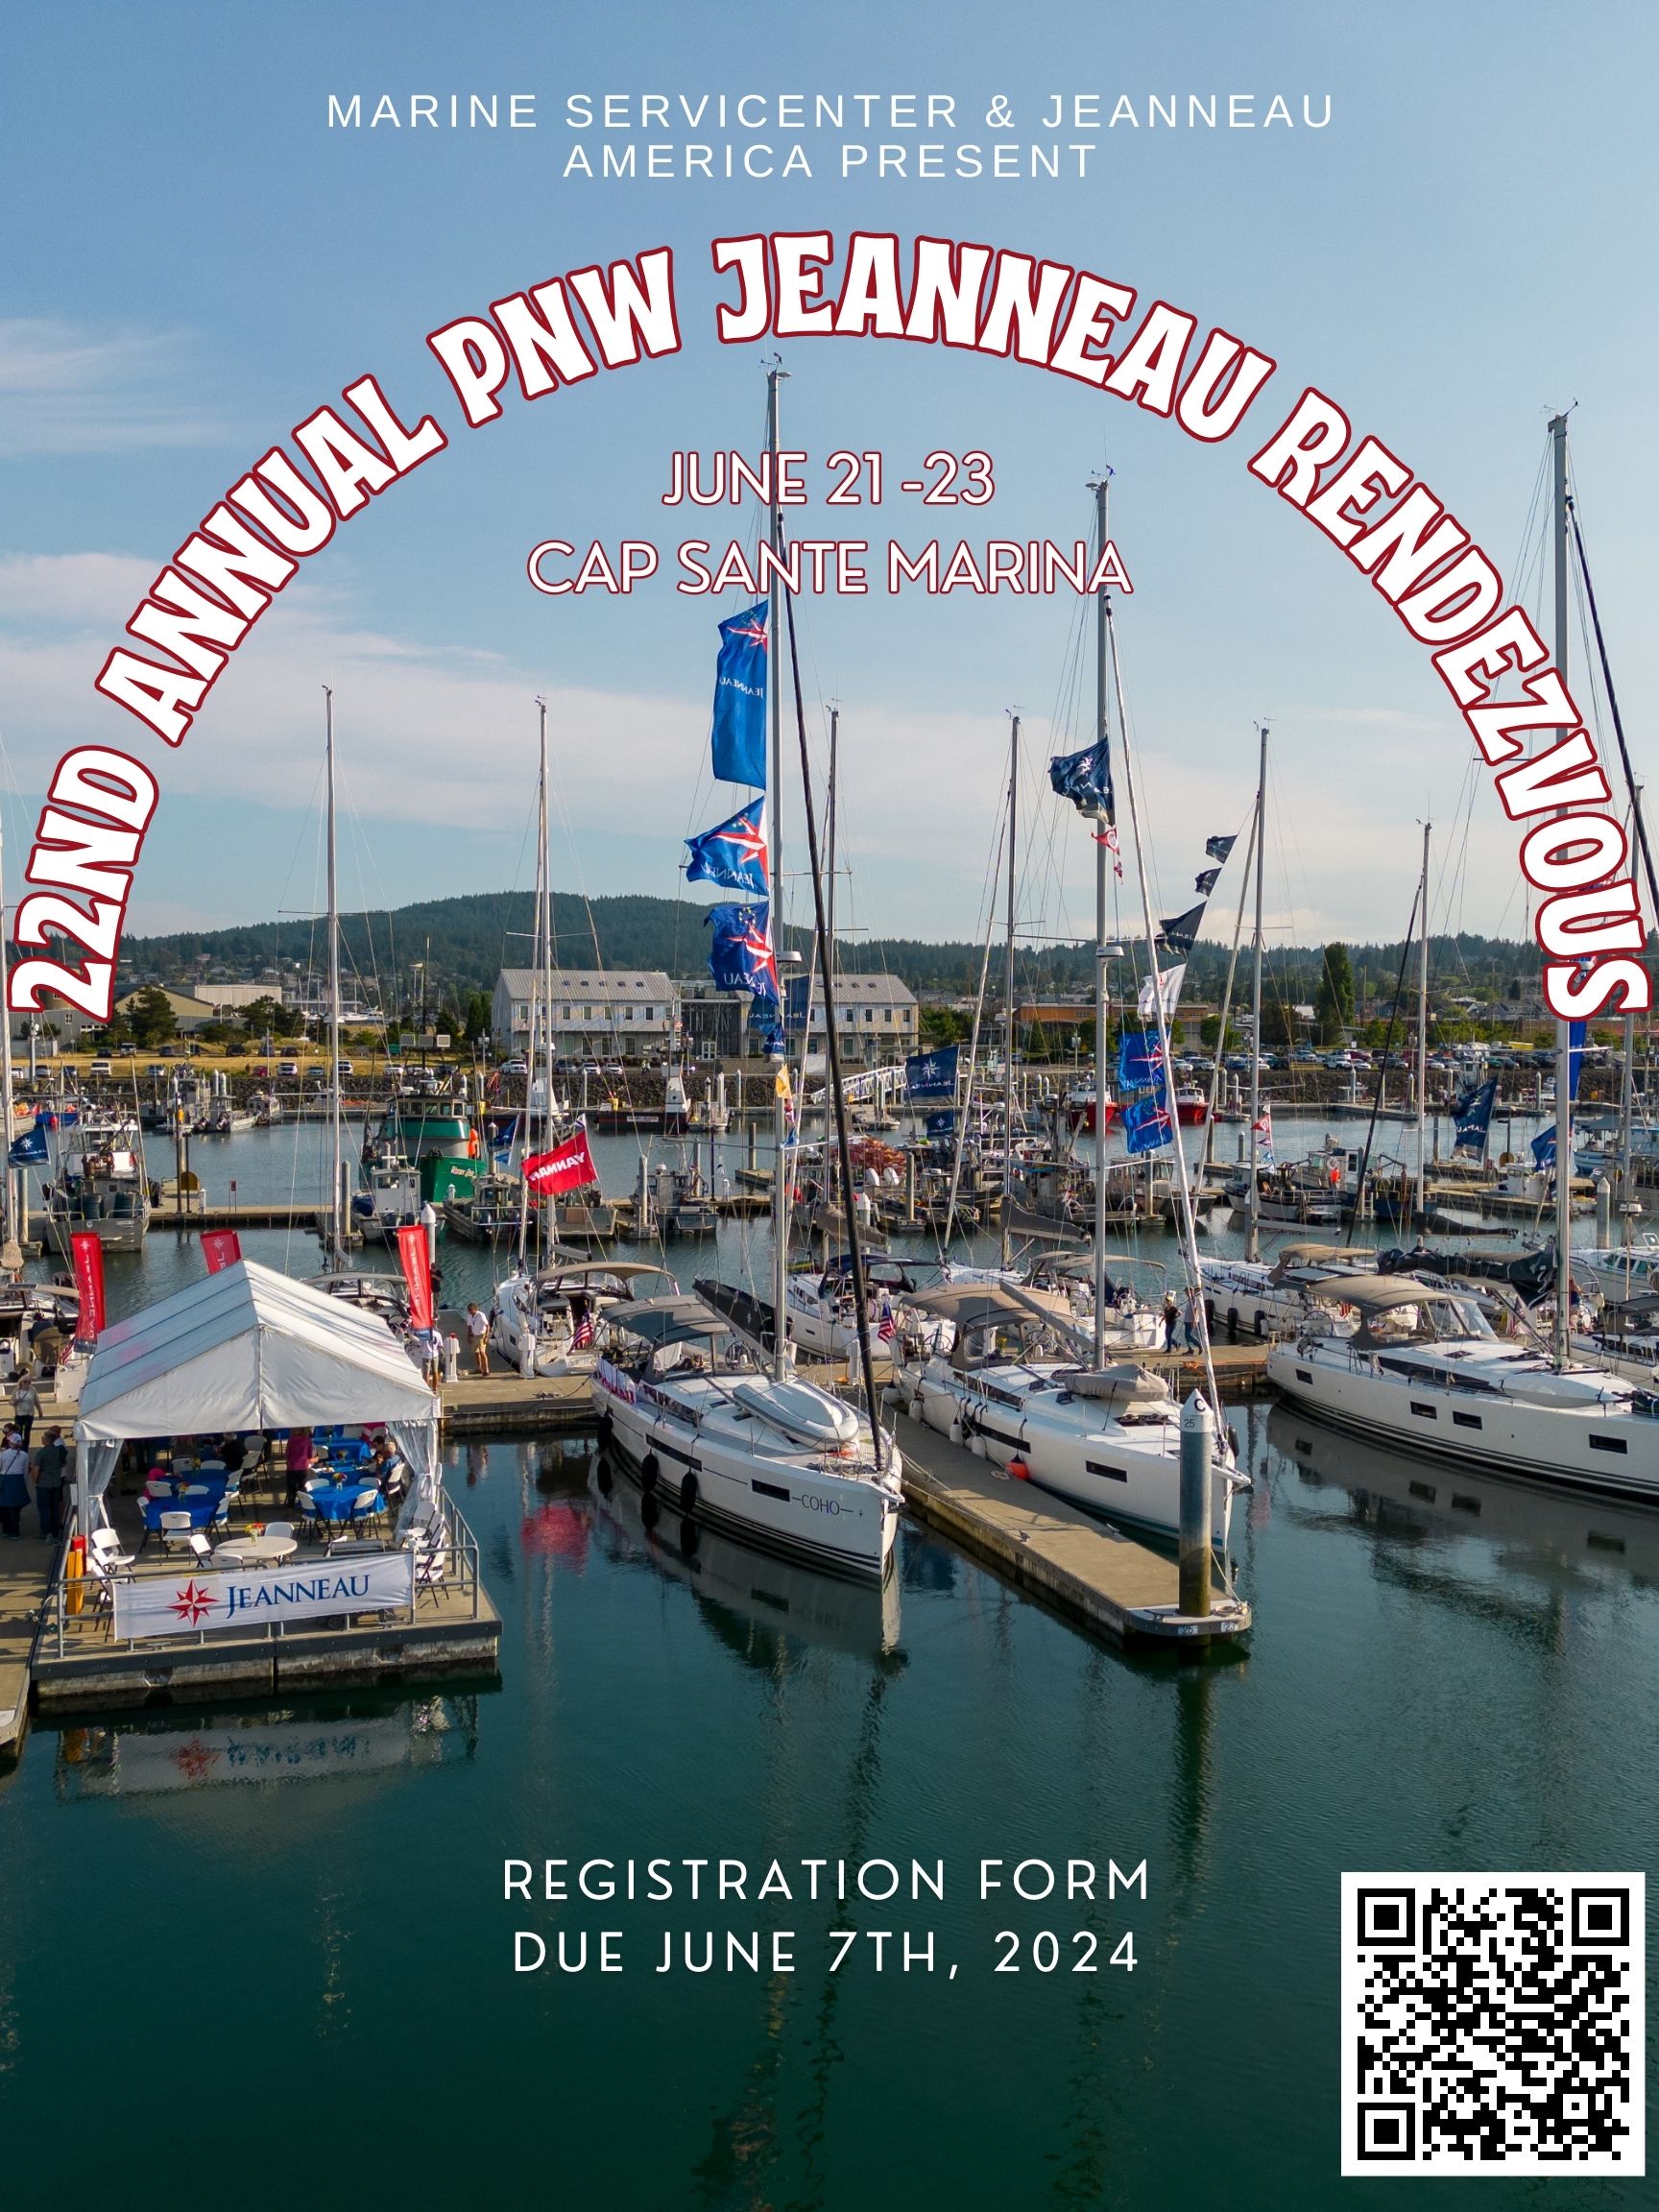 flyer advertising the 22nd annual pnw Jeanneau rendezvous with boats and marina in the background